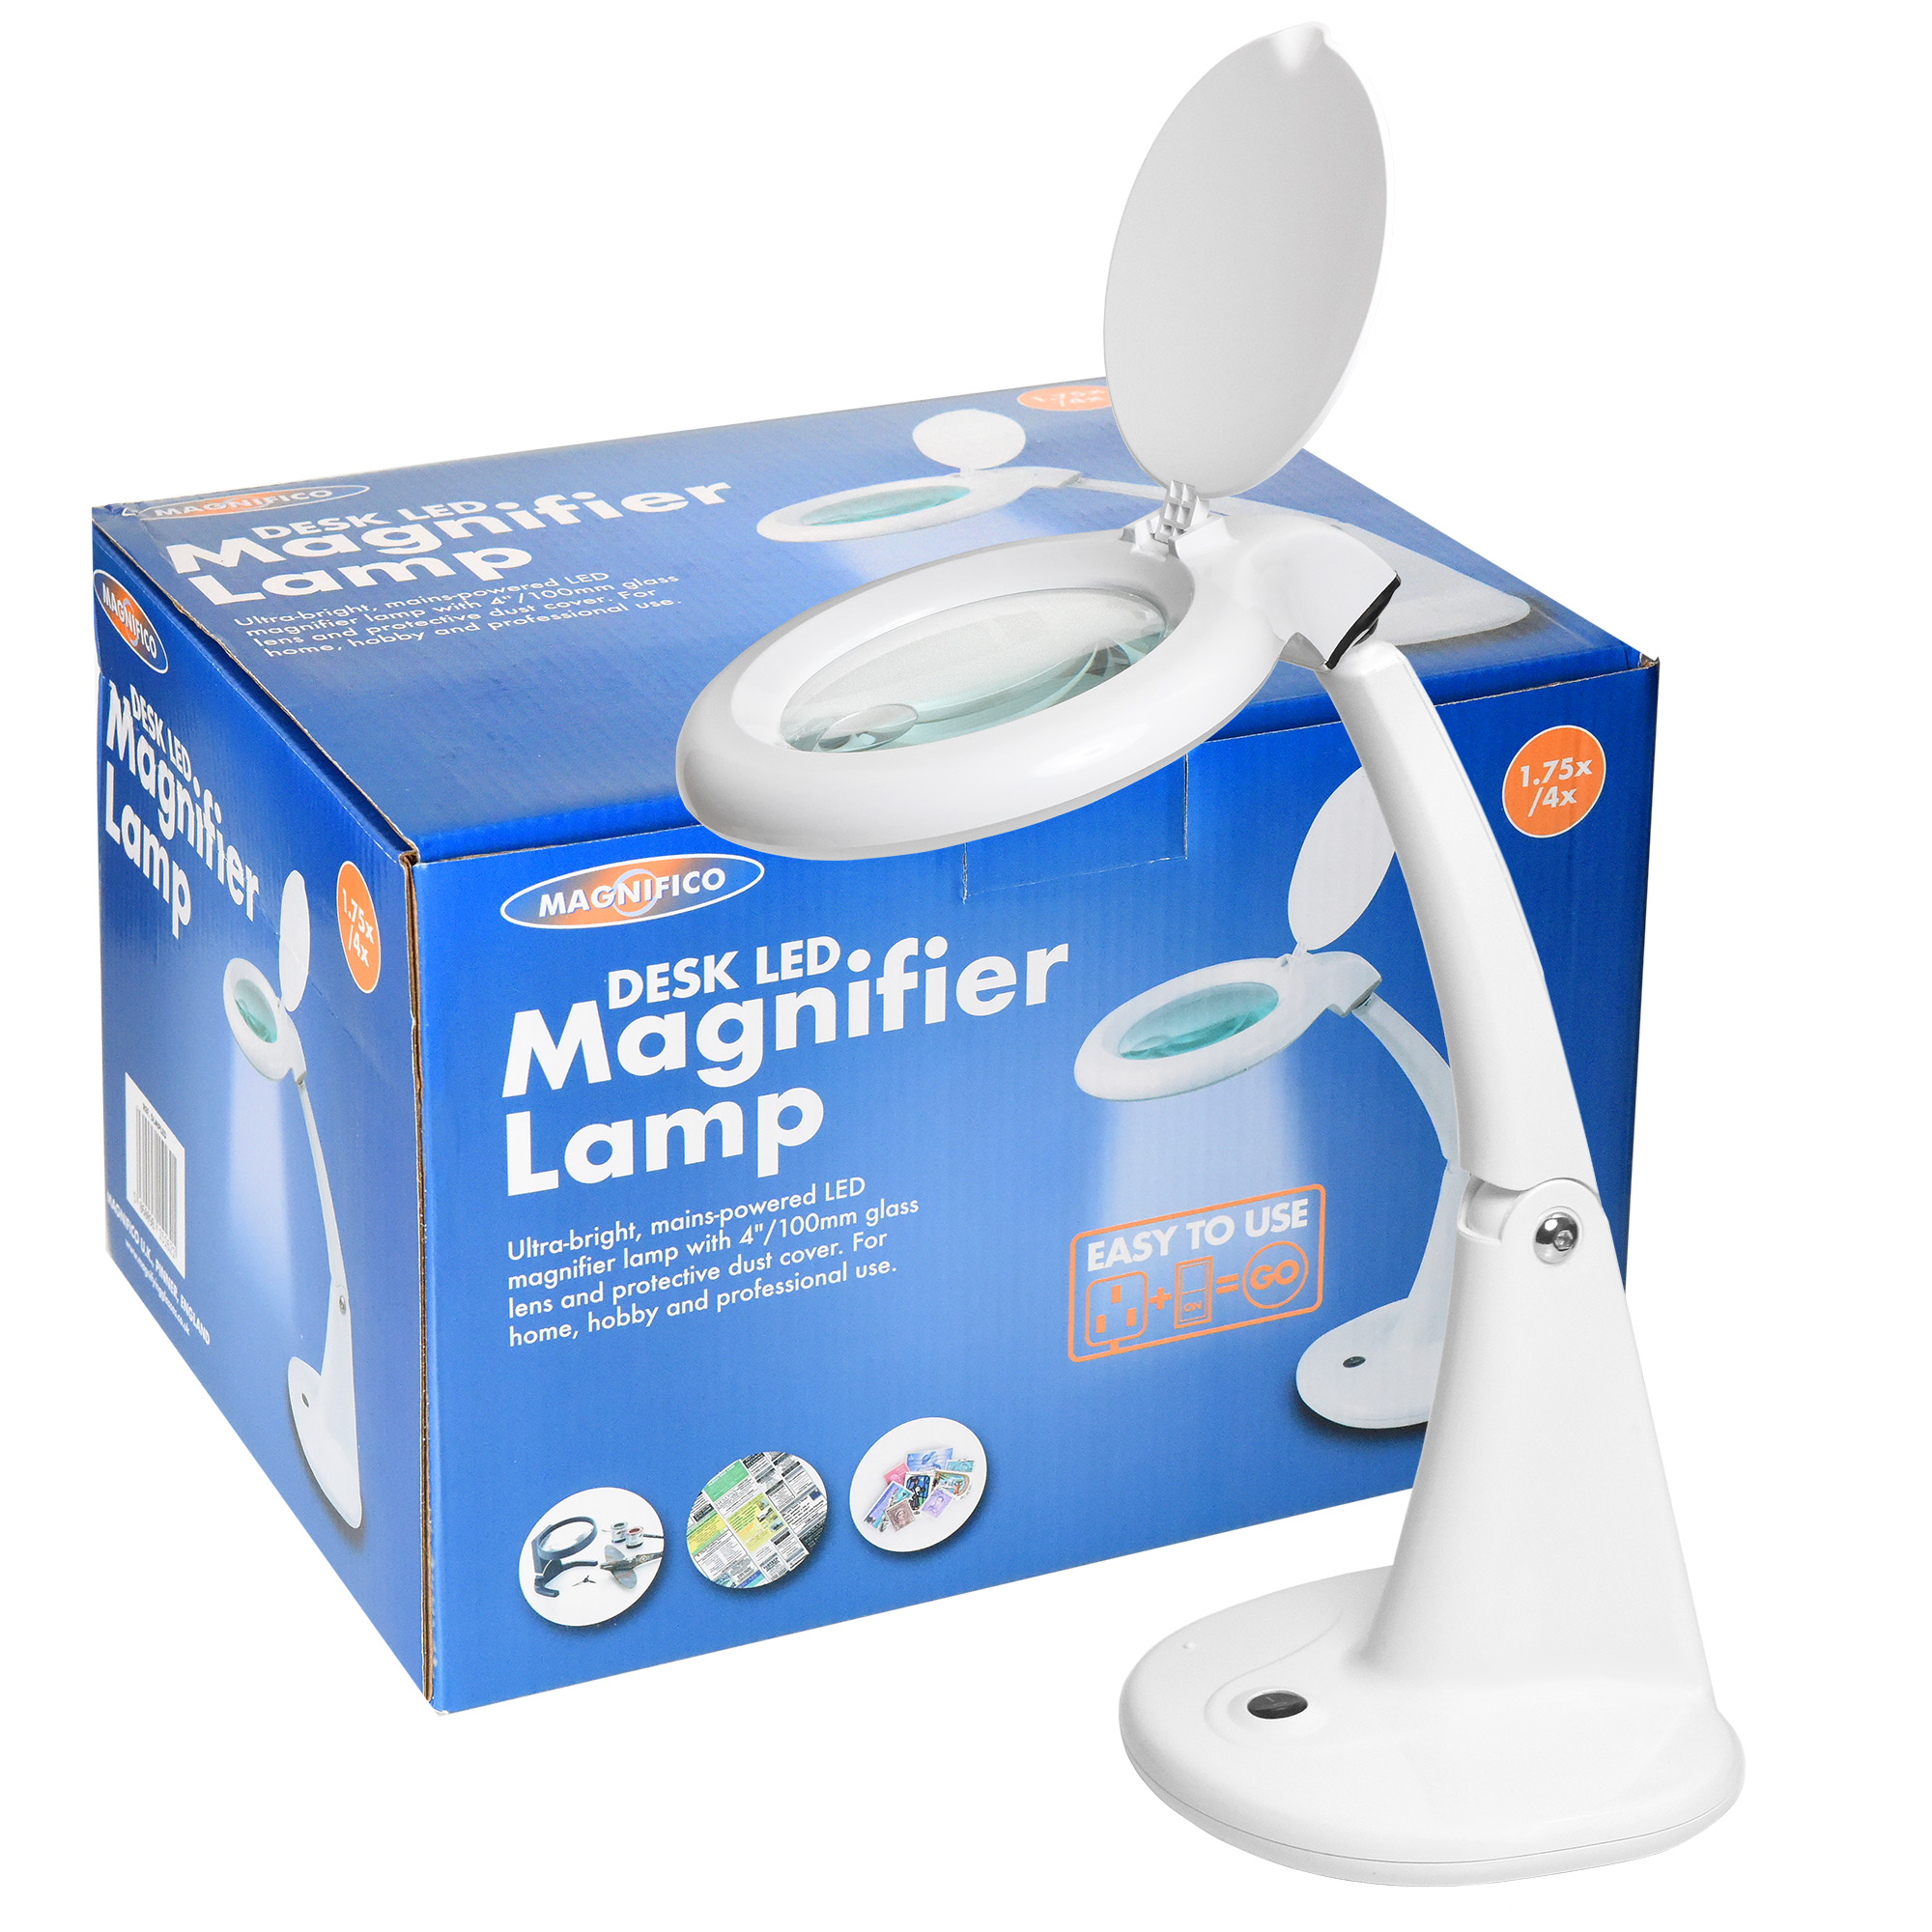 Magnifiers for Christmas - Desktop LED Magnifier Lamp (UK only)